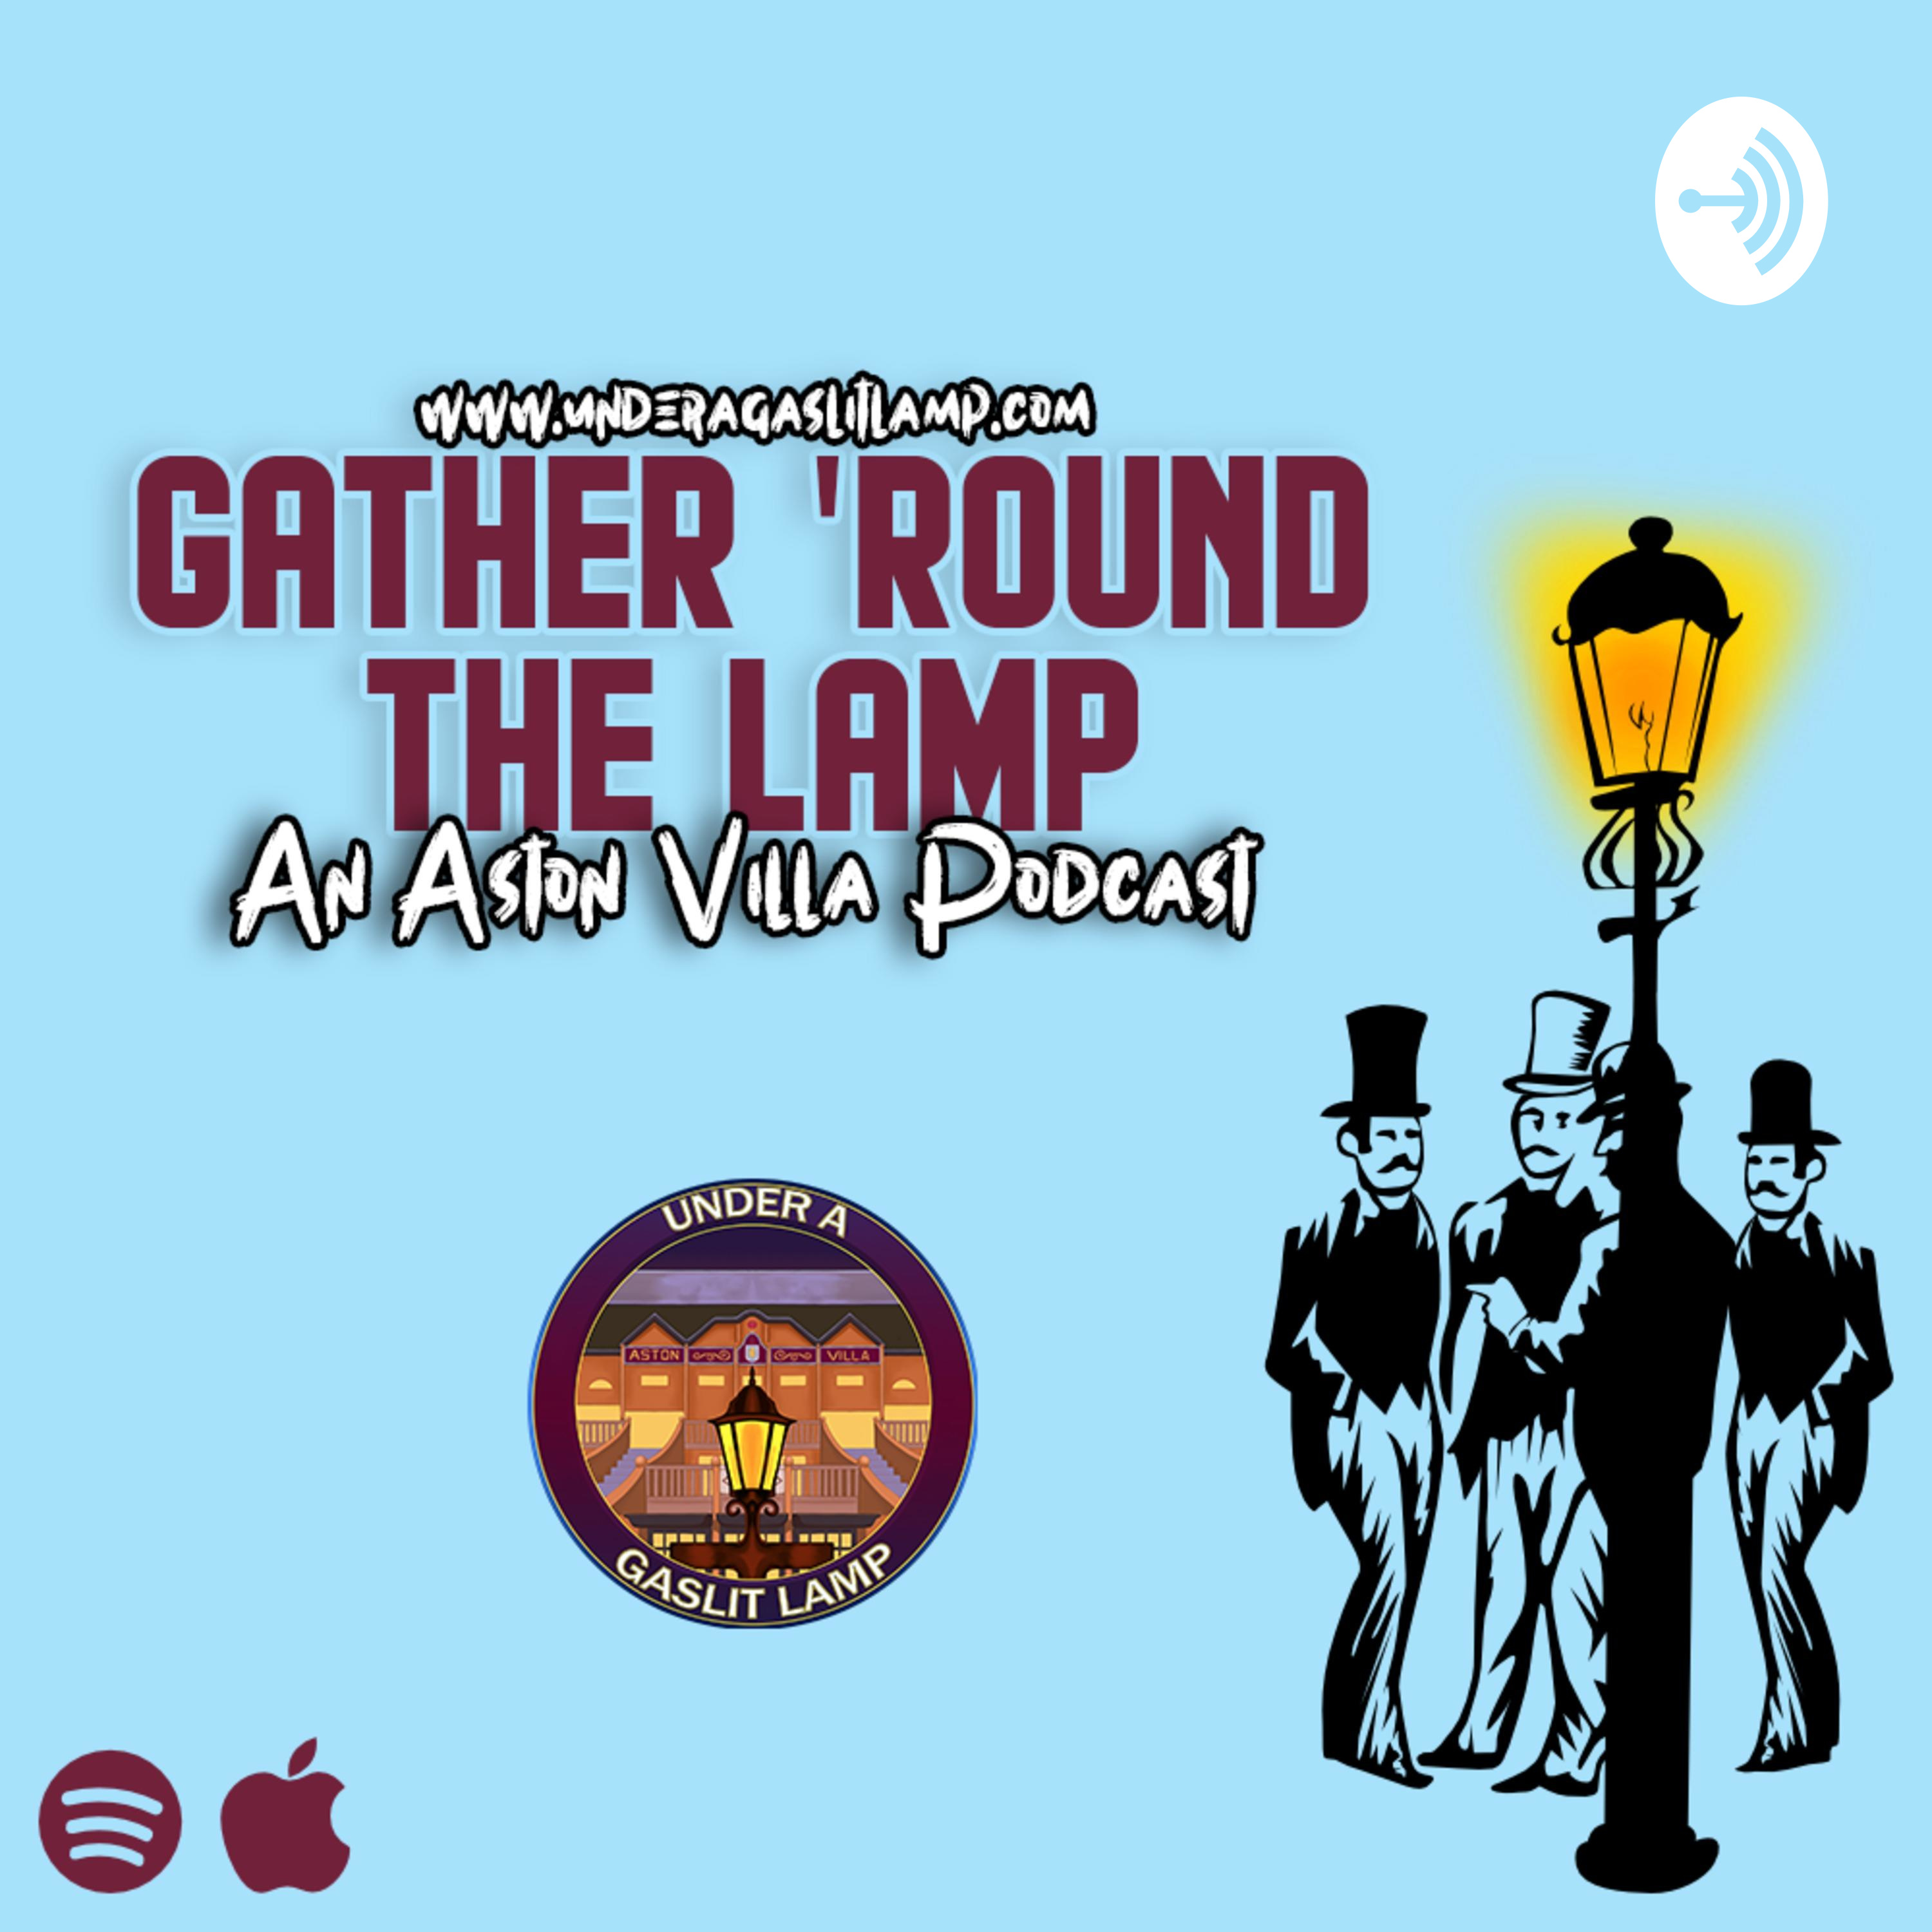 Gather 'Round The Lamp S4 E11 - A New Dawn - Gerrard's sacking, Breezing past Brentford and the arrival of Unai Emery